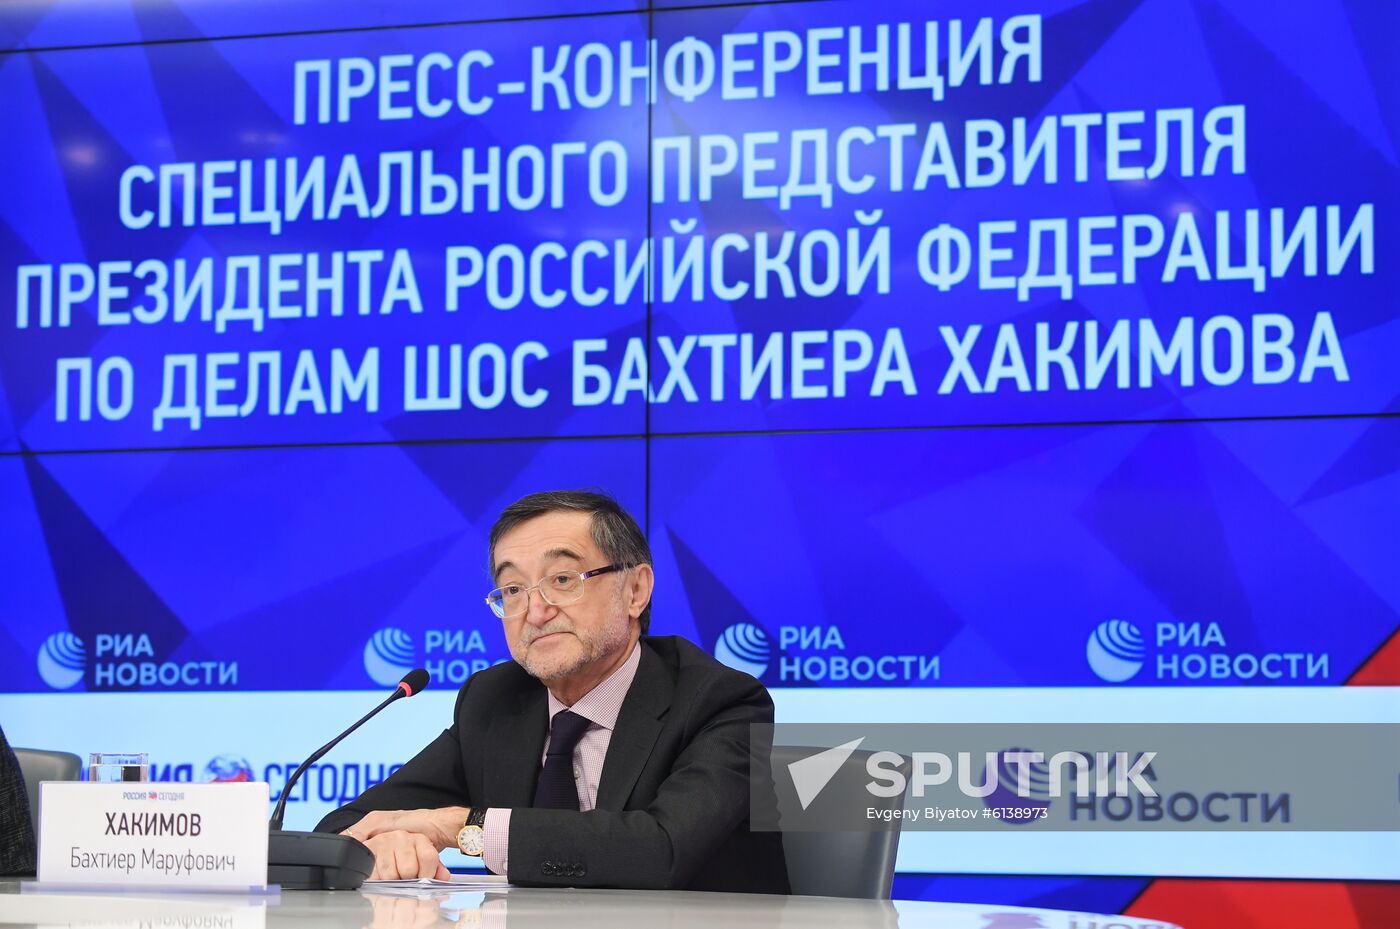 News conference with Russia's Special Presidential Envoy to SCO Bakhtiyer Khakimov